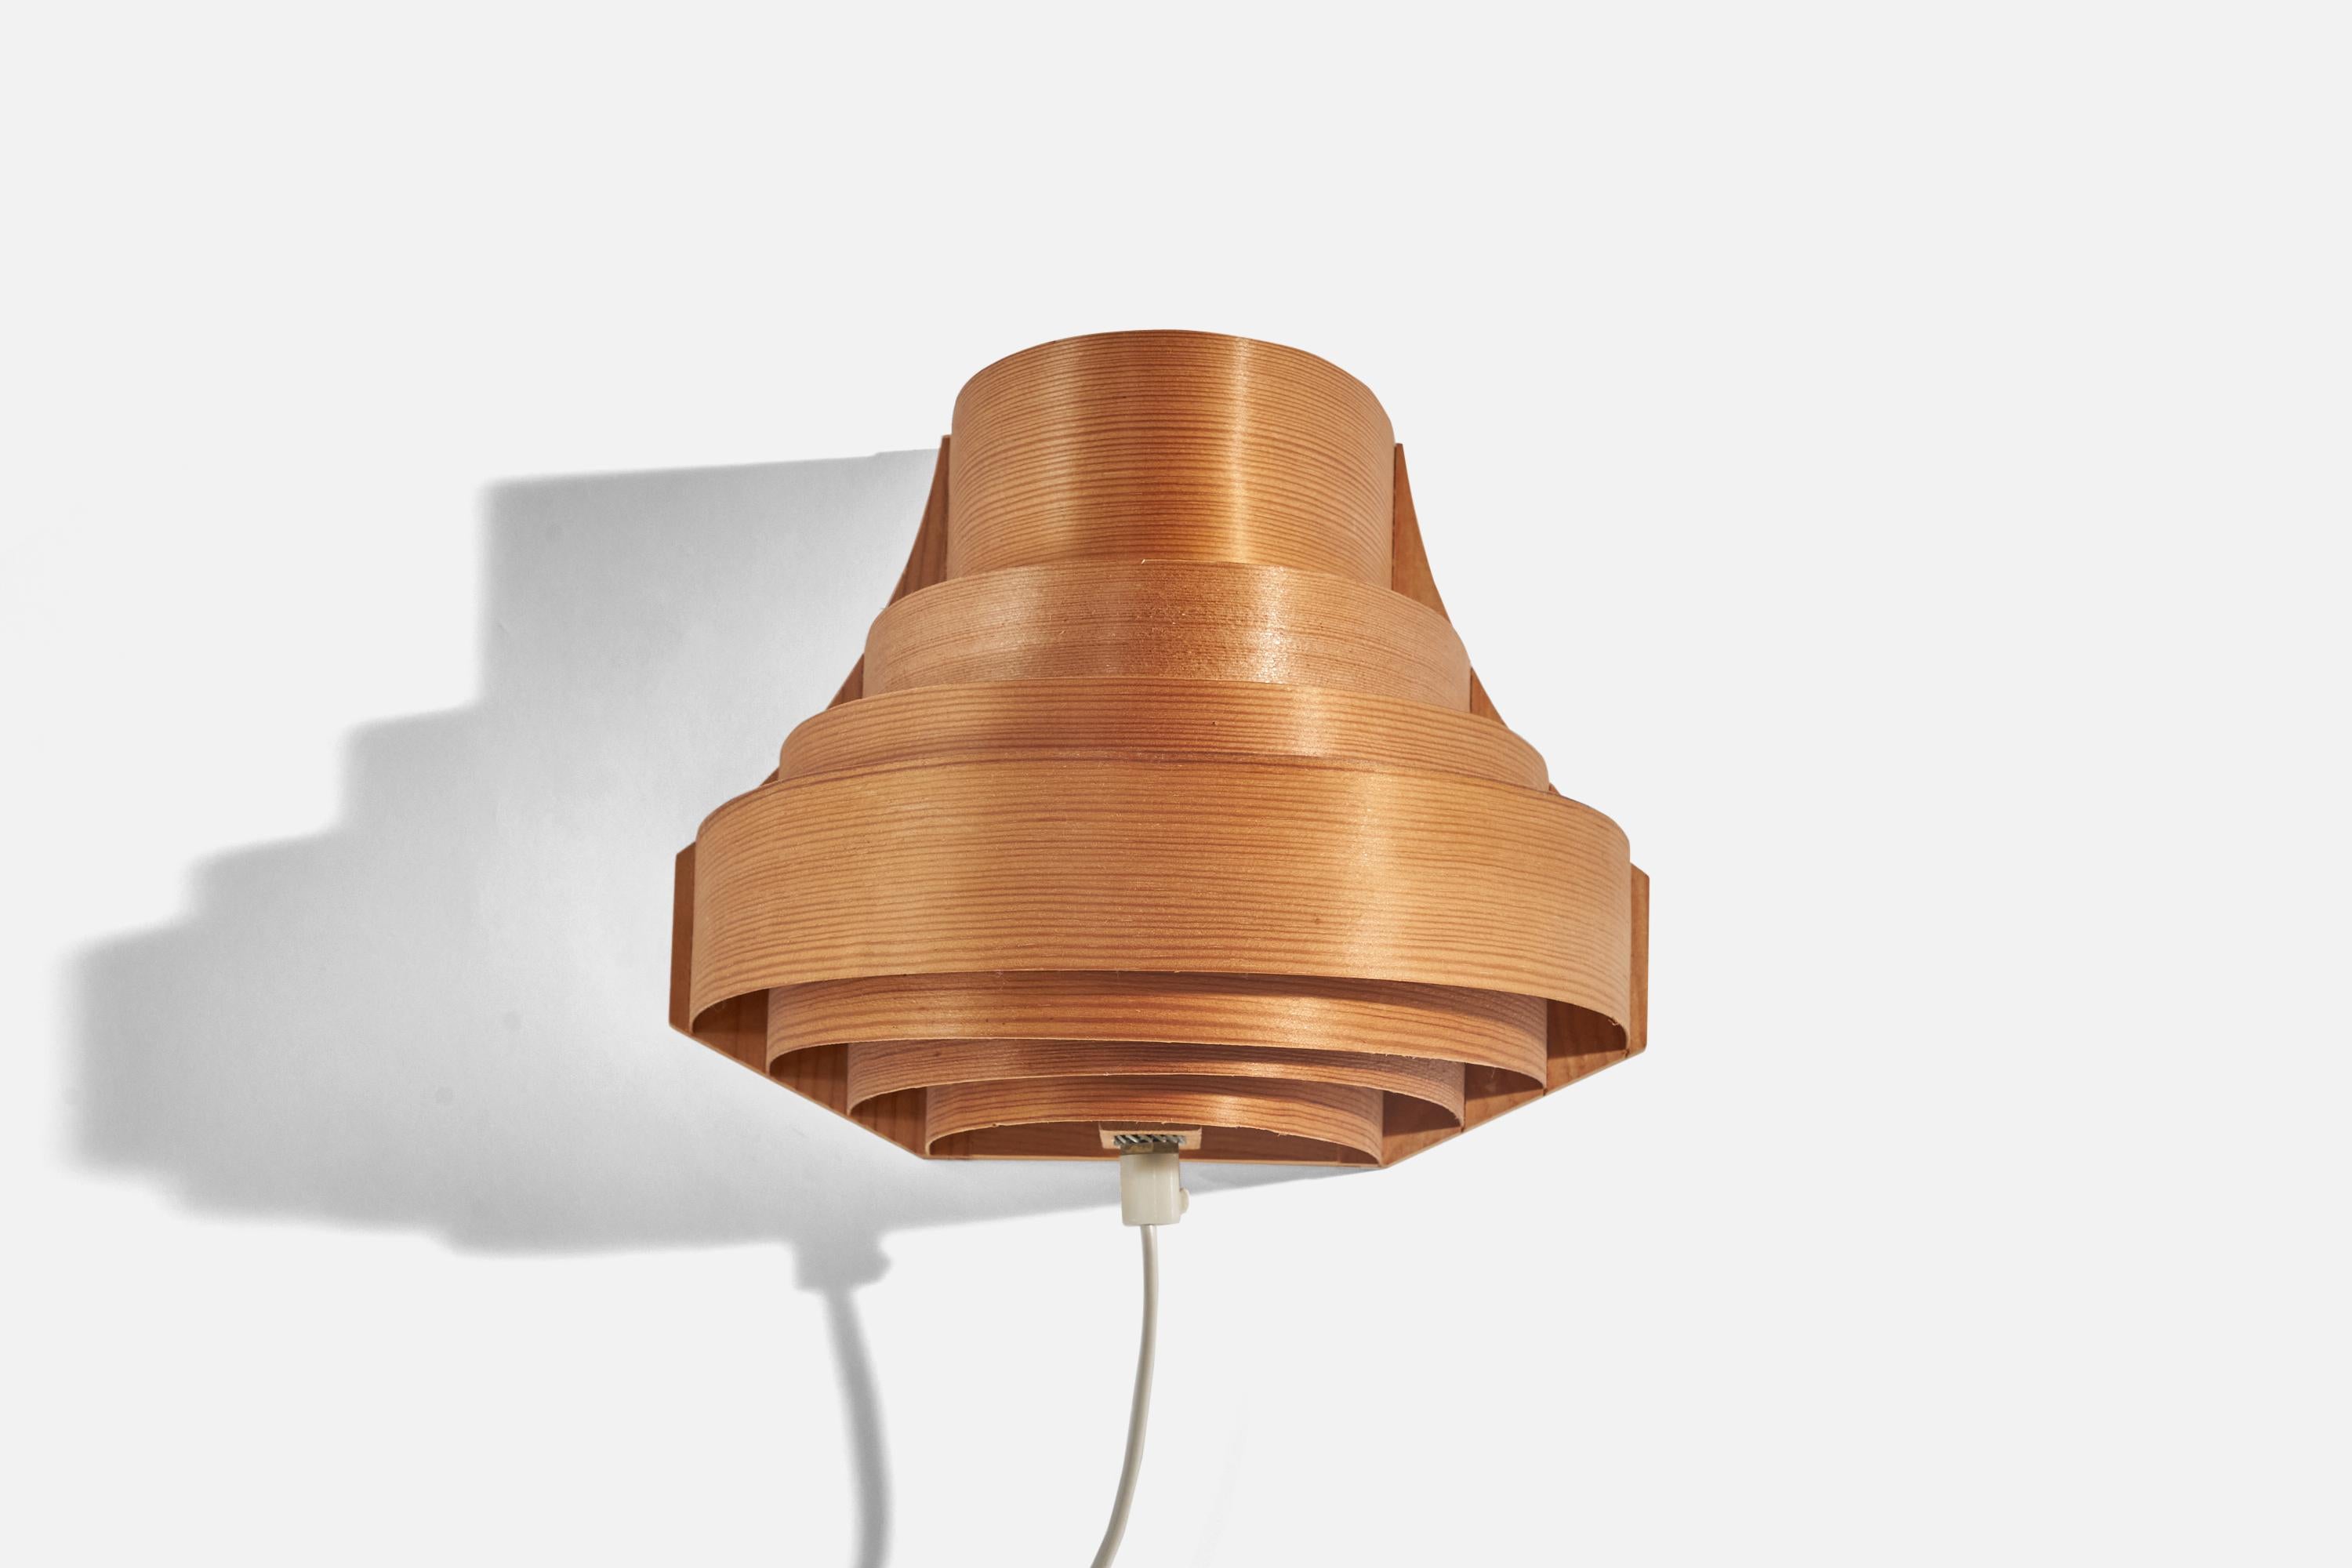 A pine and moulded pine veneer sconce / wall light designed and produced by Hans-Agne Jakobsson, Sweden. c. 1970s.

Dimensions of back plate (inches) : 1.08 x 3.72 x 0.56 (height x width x depth).

Socket takes standard E-26 medium base